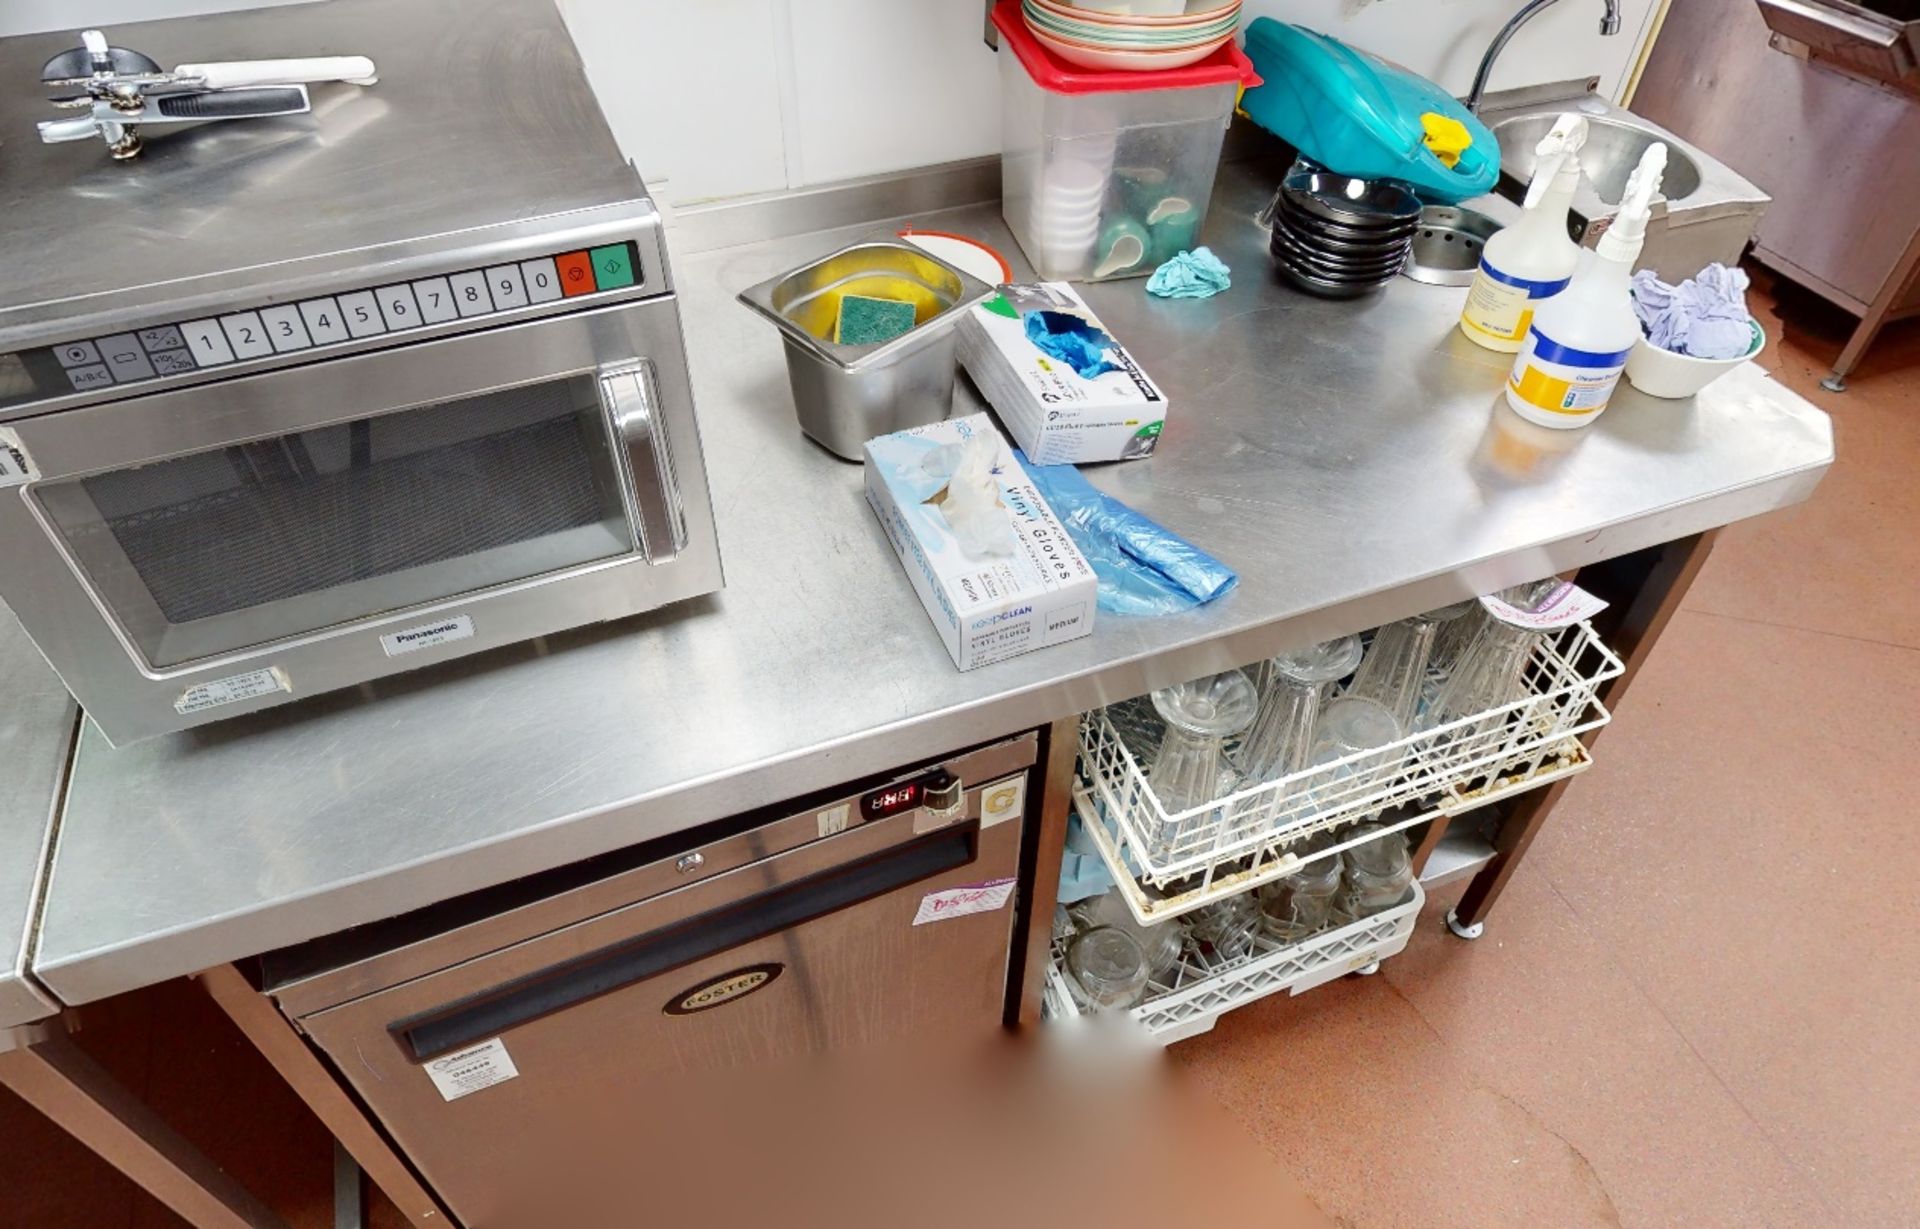 1 x Commercial Stainless Steel Prep Unit With Tray Storage, Narrow Under-shelf, and Upstand